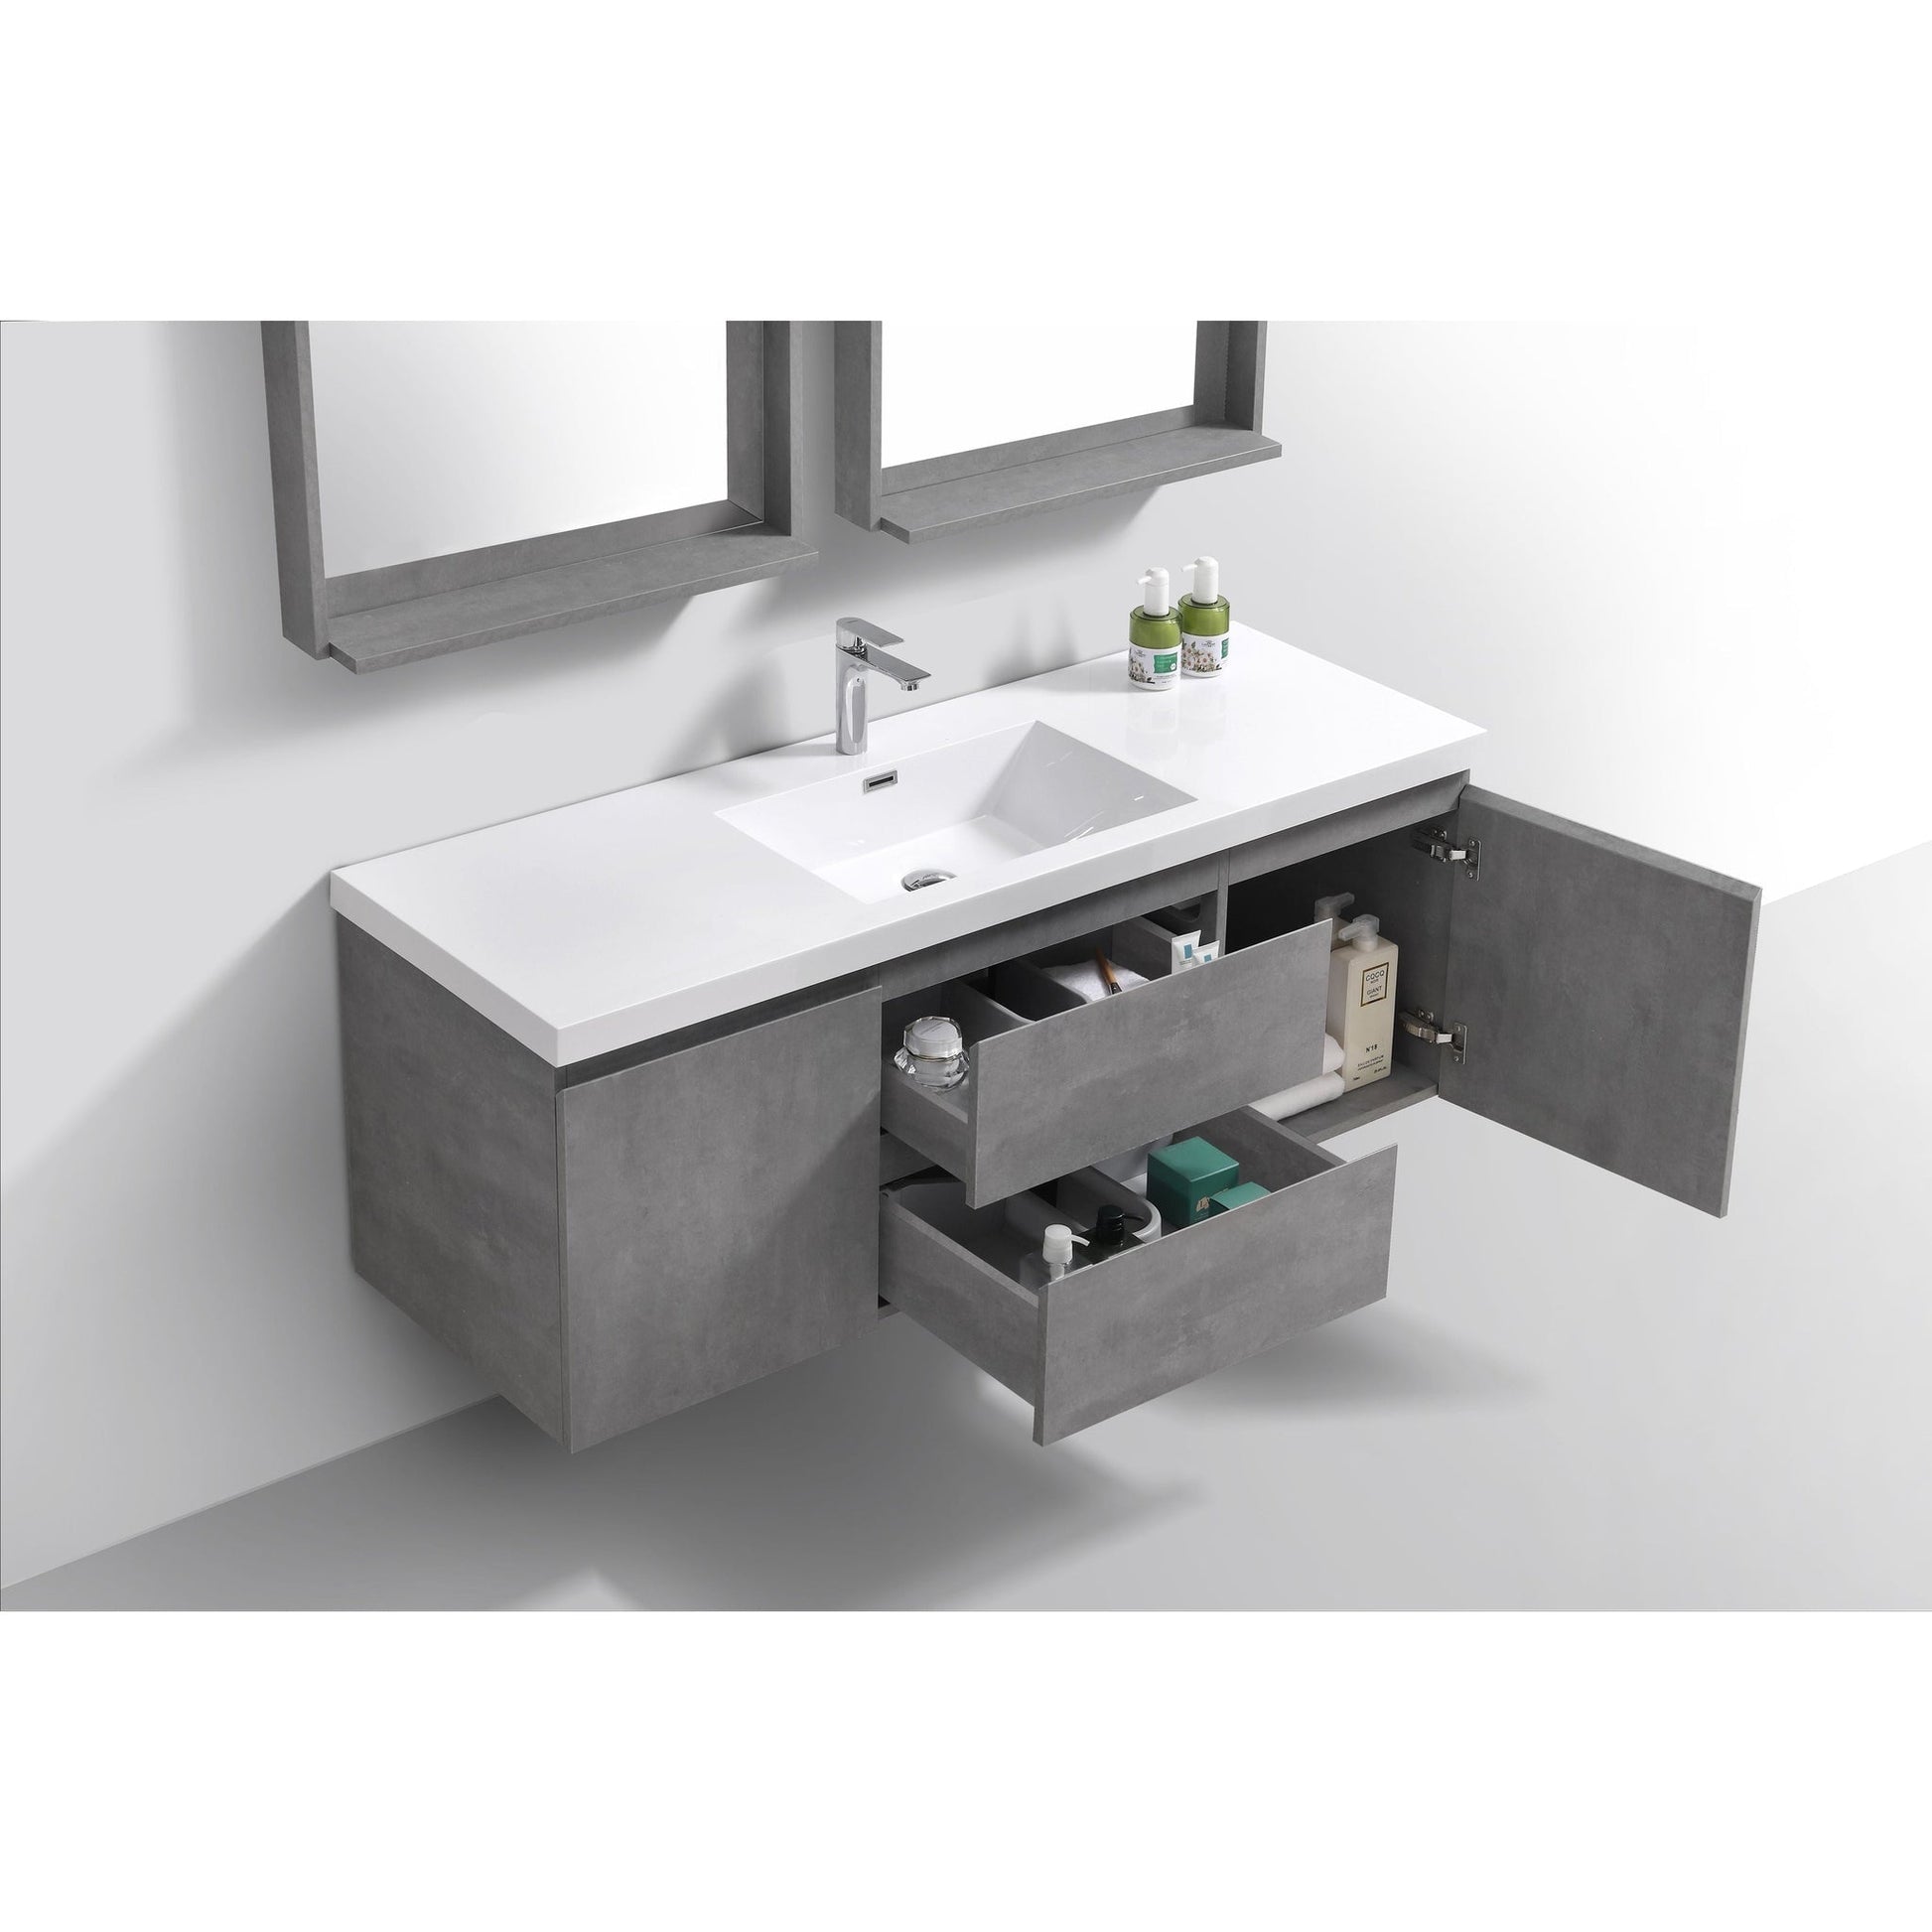 Moreno Bath Bohemia Lina 60" Cement Gray Wall Mounted Vanity With Single Reinforced White Acrylic Sink